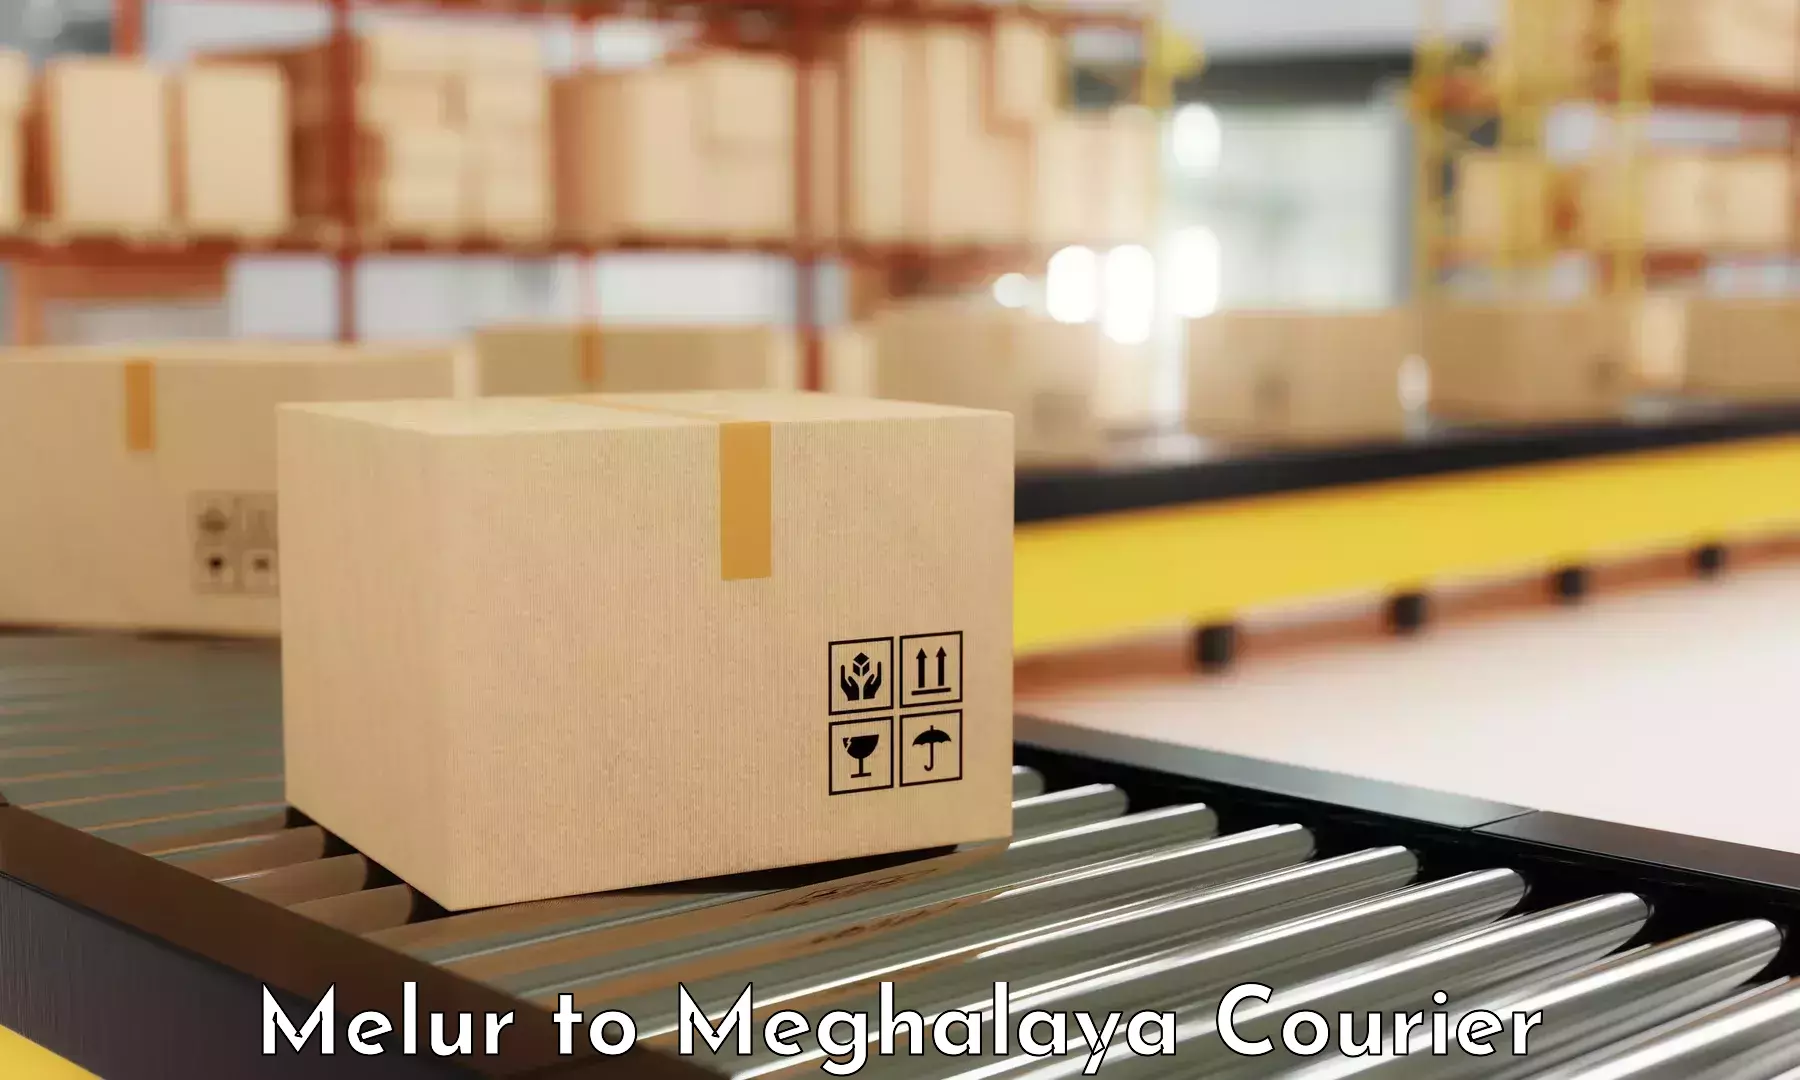 24/7 courier service in Melur to Meghalaya